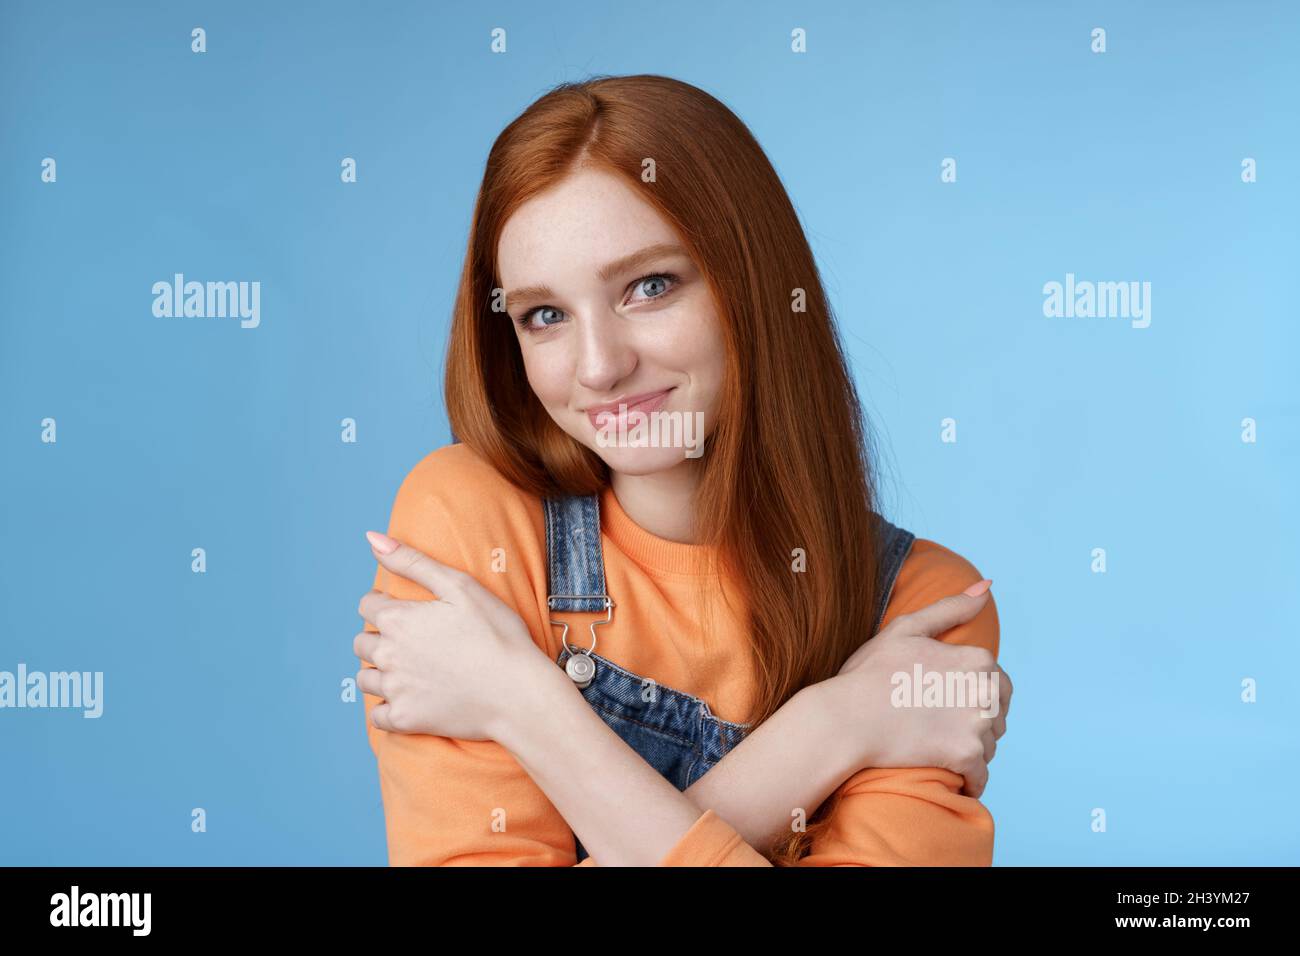 Romantic sensitive flirty young redhead girlfriend feel warmth embraces hugging herself hands crossed body tilting head smiling Stock Photo